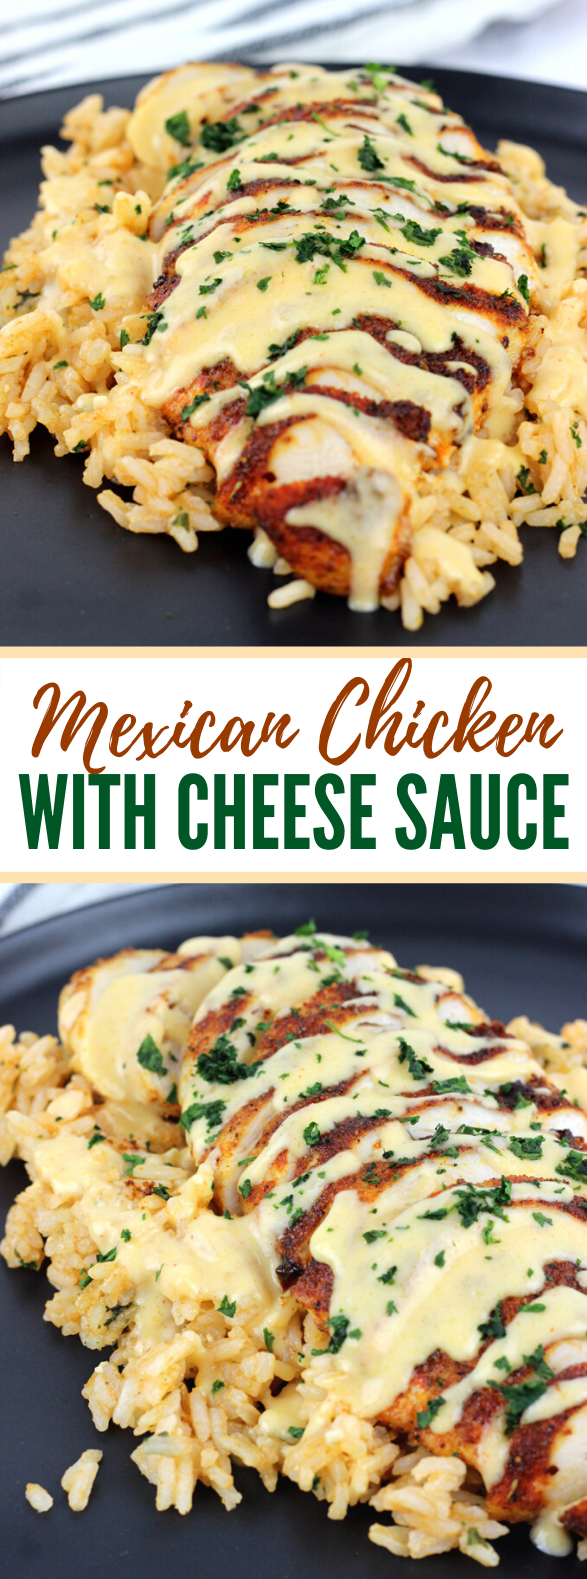 MEXICAN CHICKEN WITH CHEESE SAUCE #dinner #meals